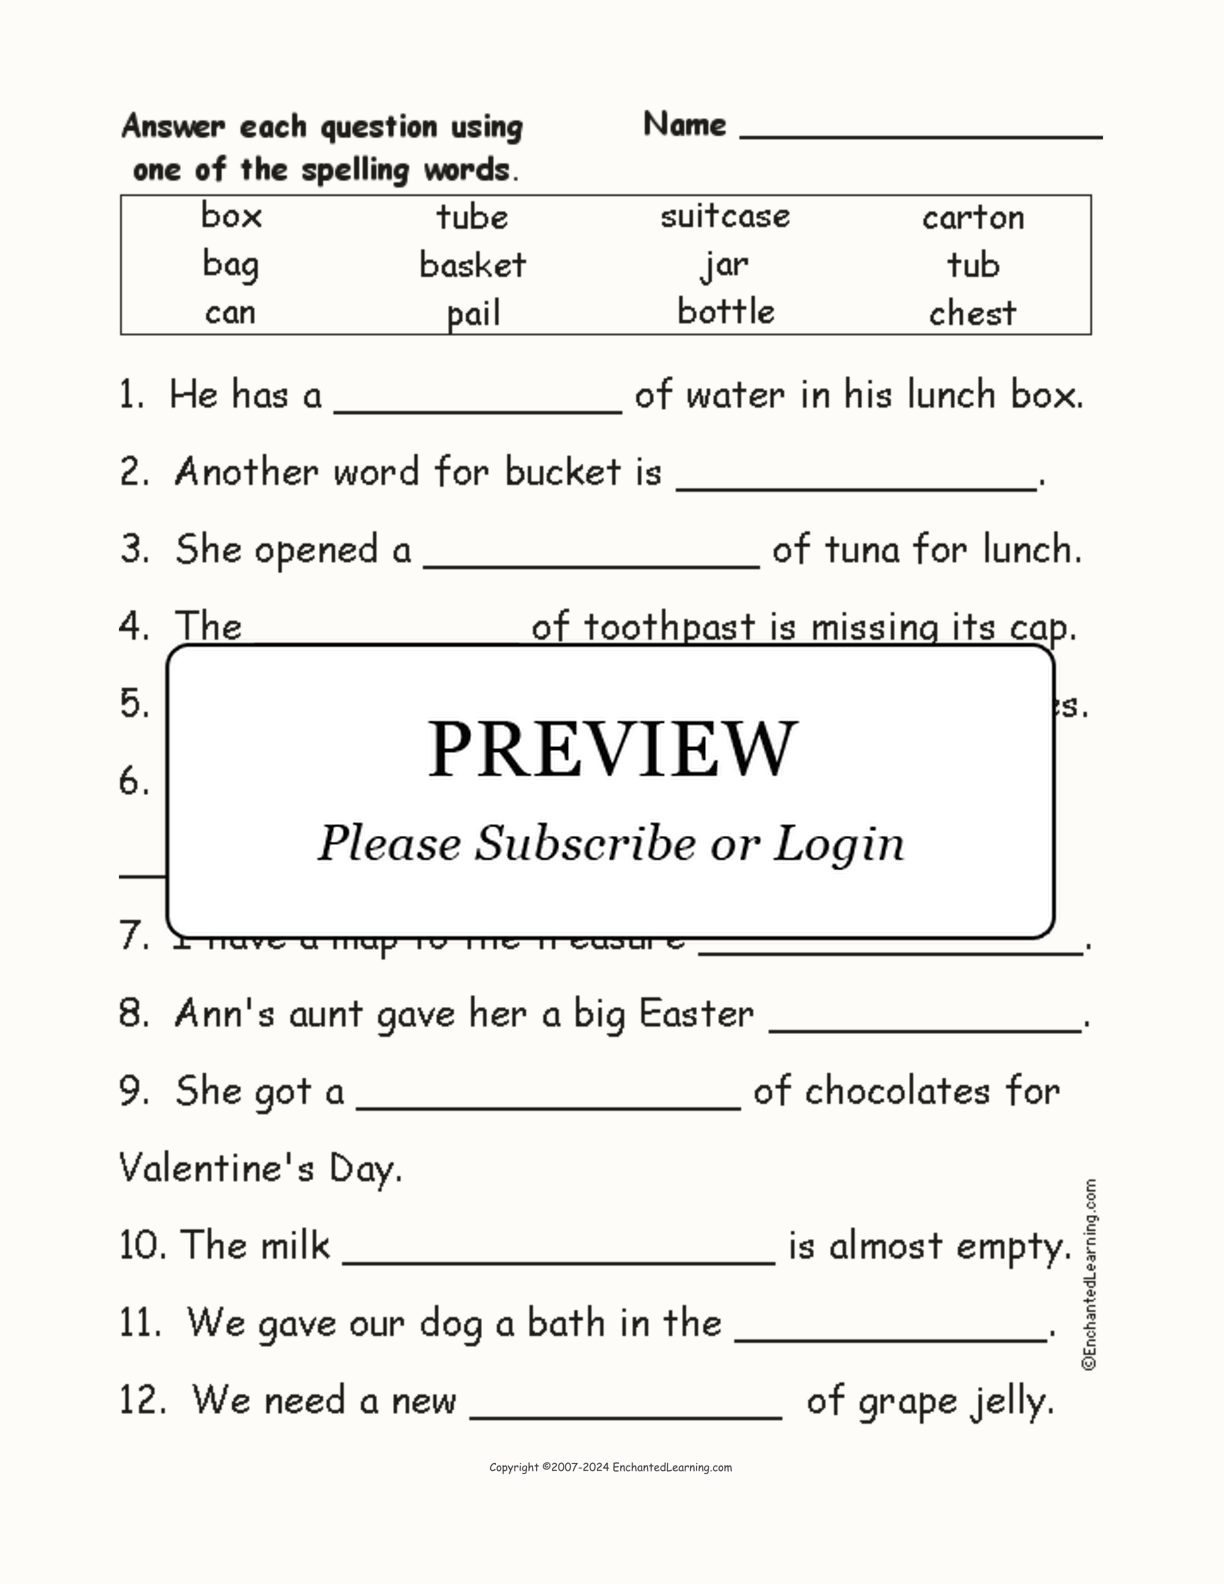 Container Spelling Word Questions interactive worksheet page 1